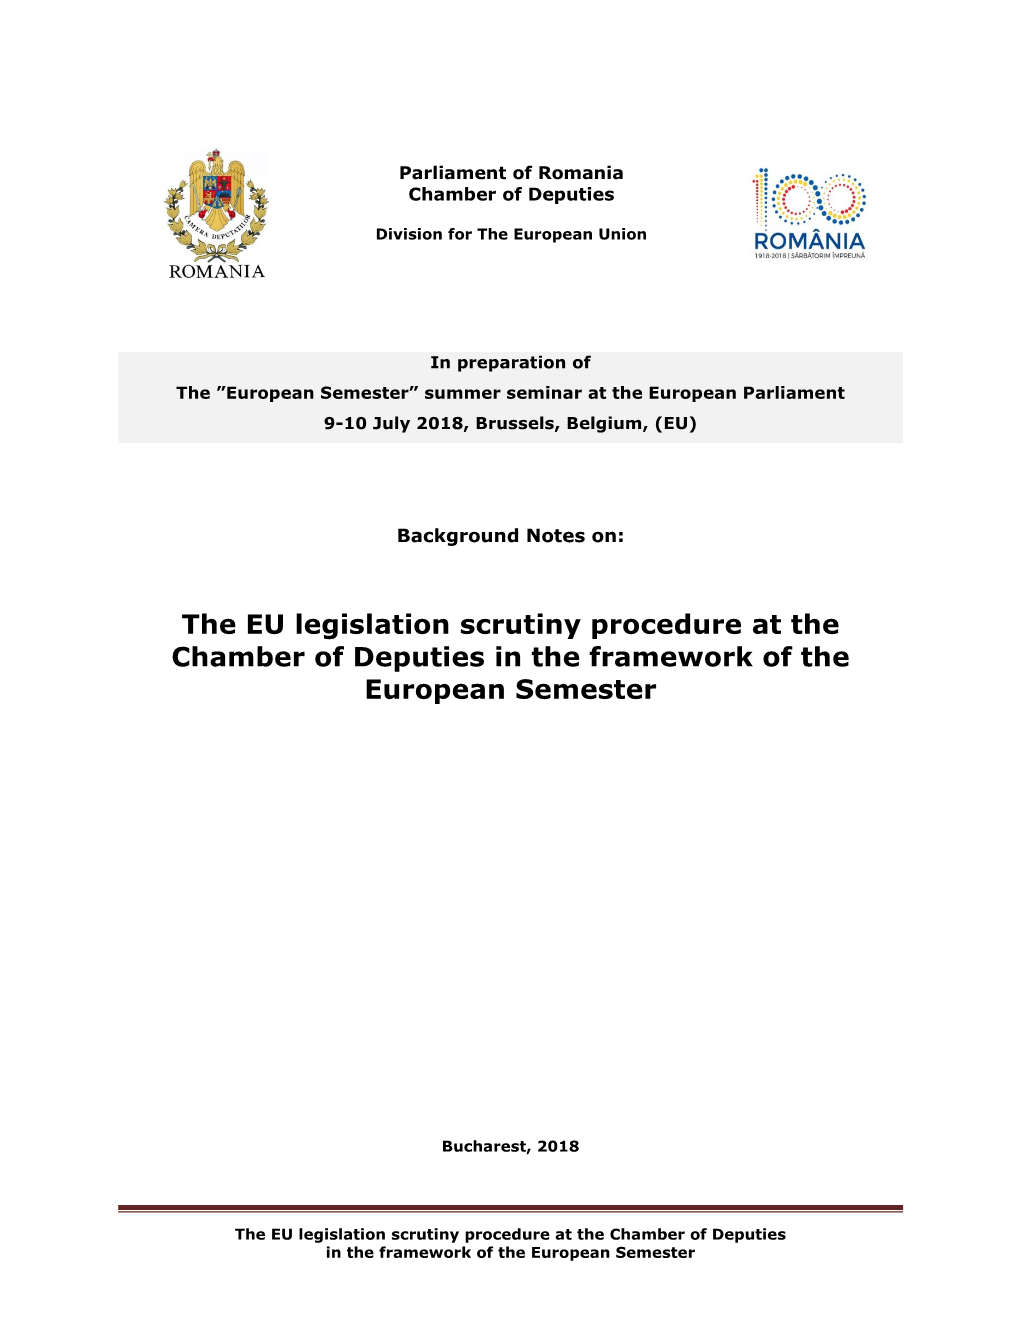 Act on Cooperation Between Parliament and Government in The